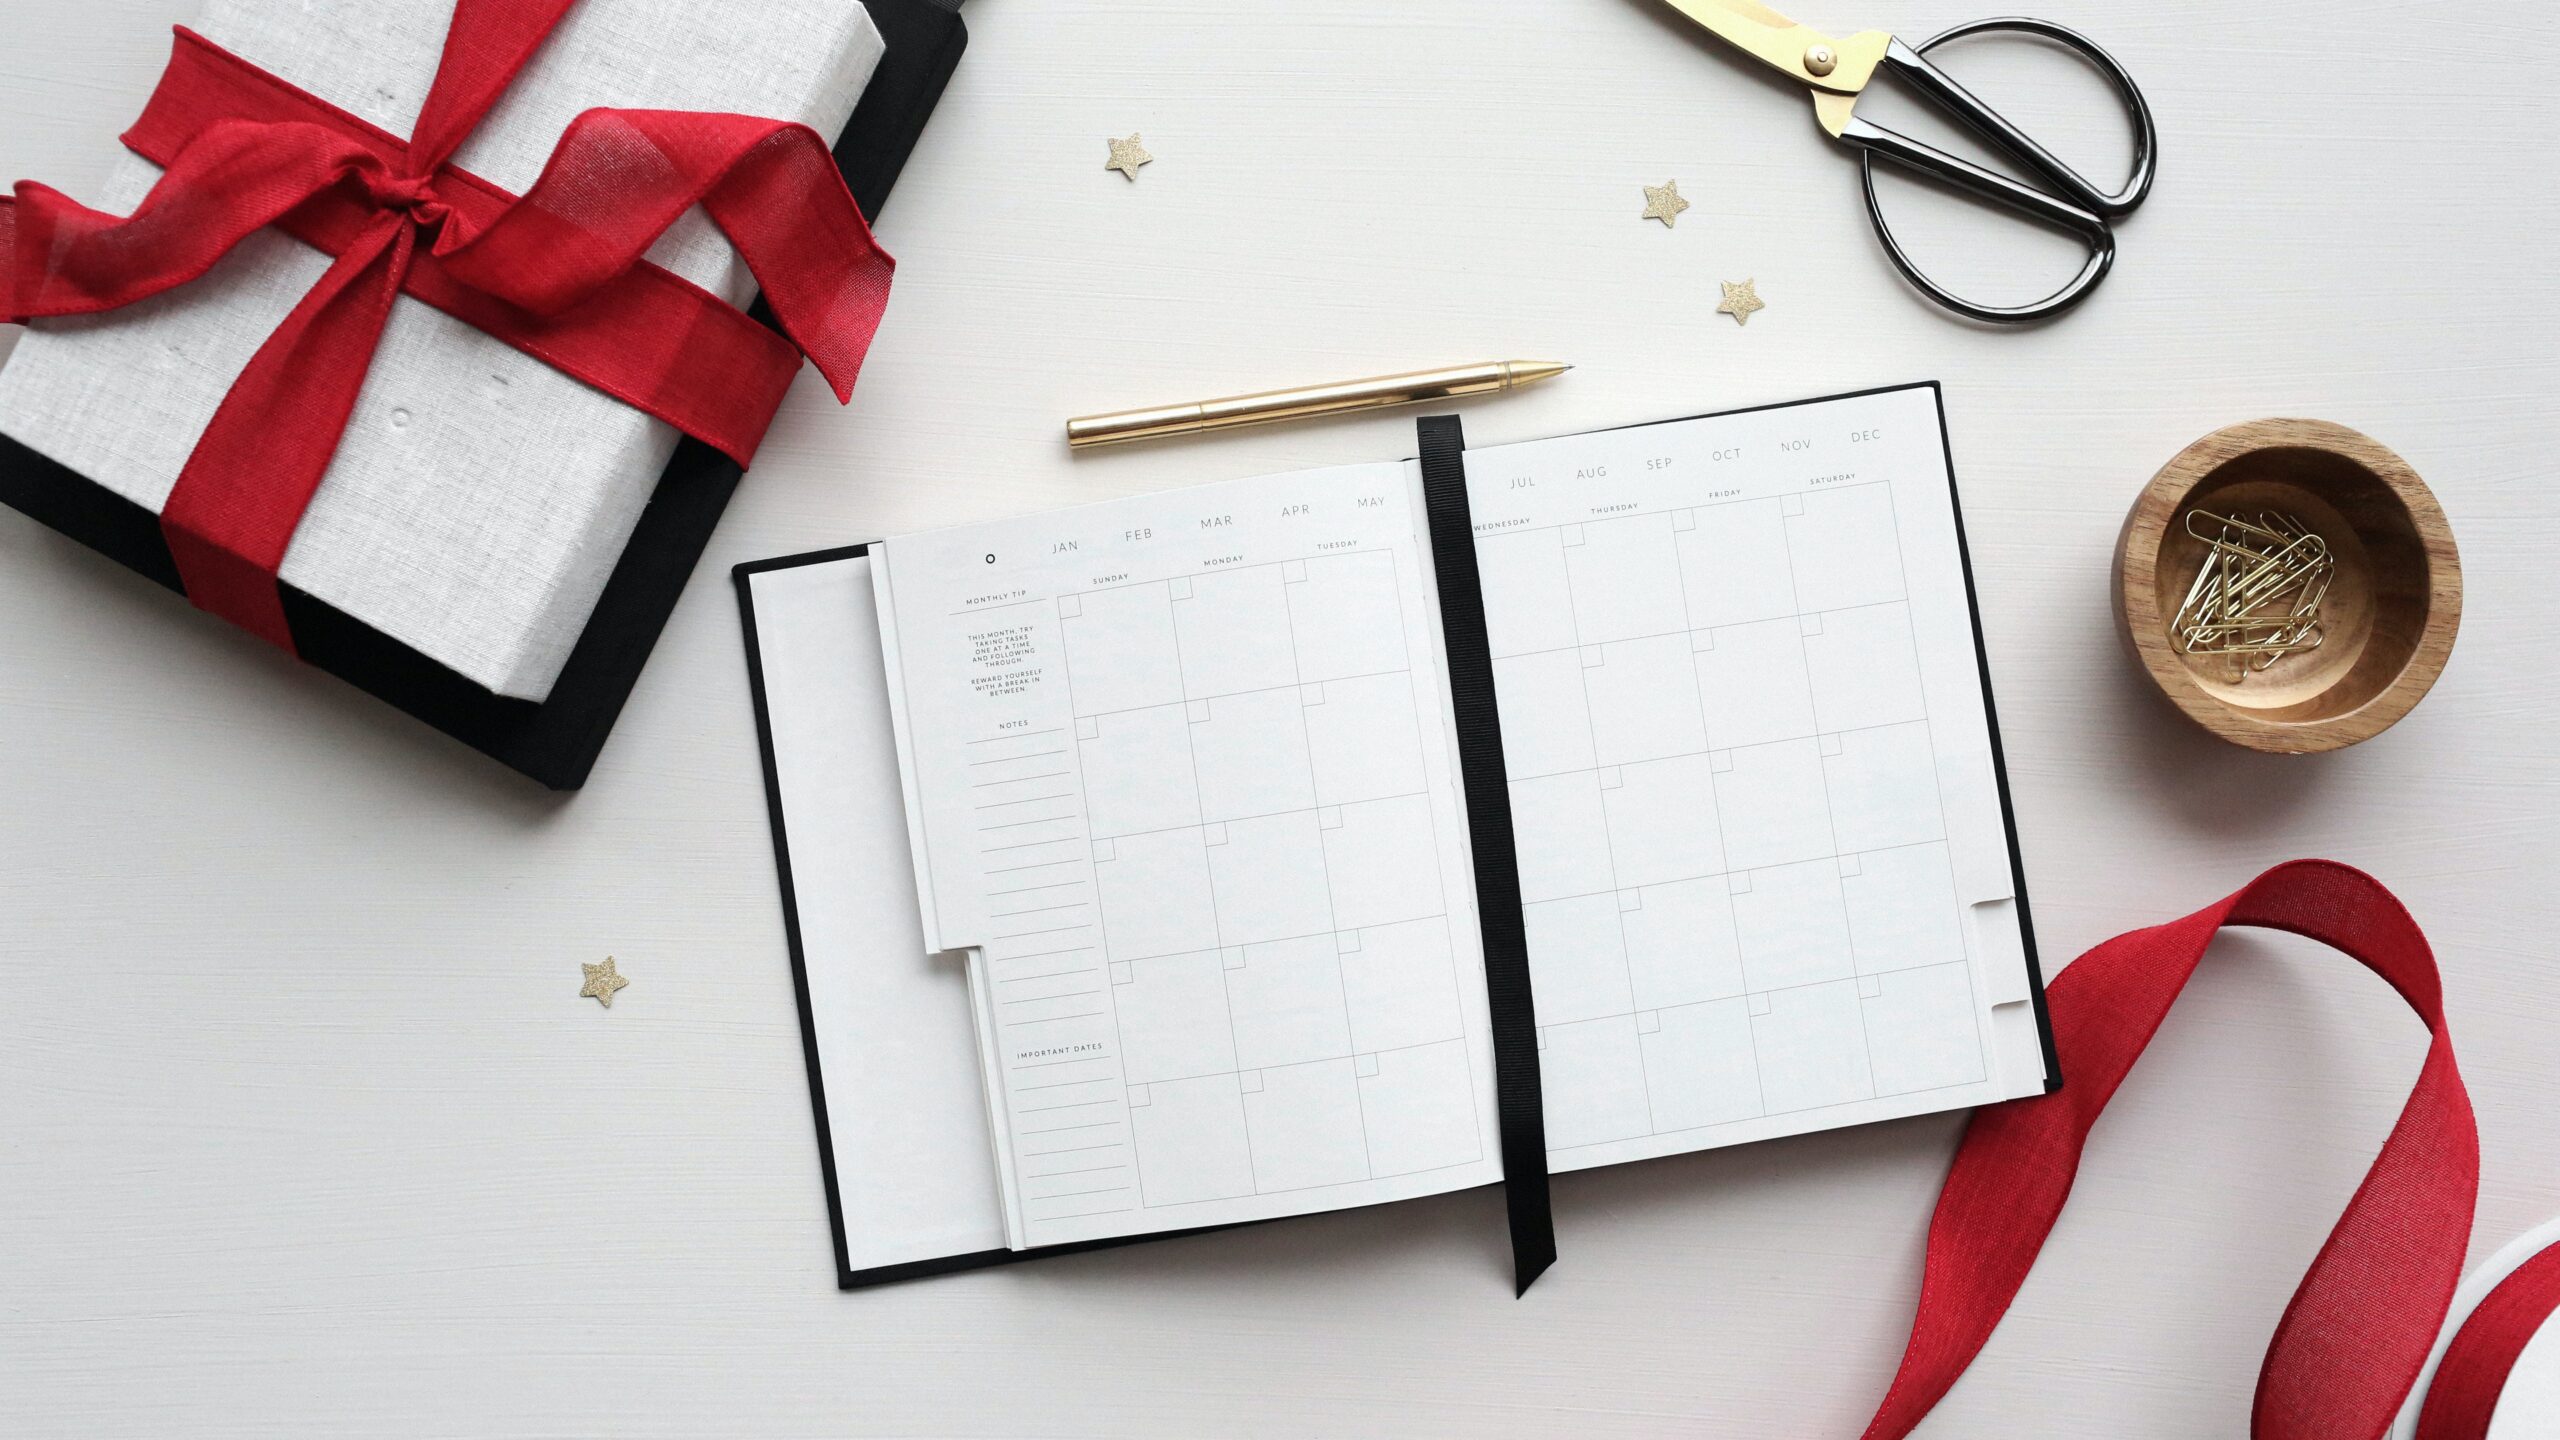 4 Pro Tips For Managing Your Holiday Schedule